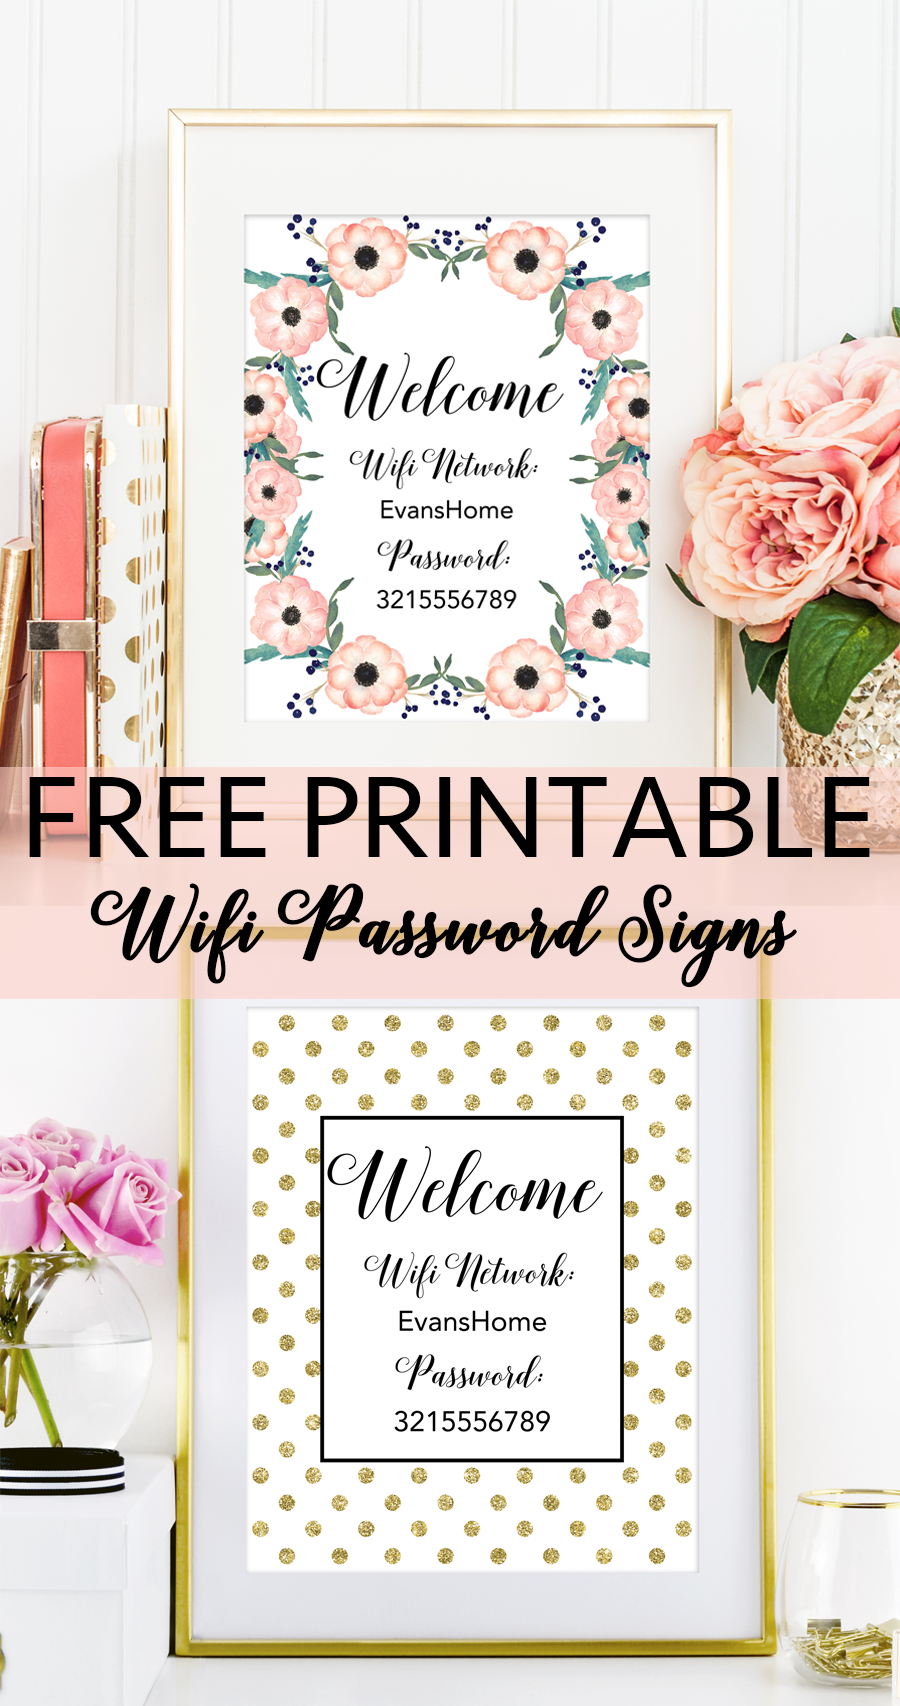 Free Printable Wifi Password Signs | Decorating Ideas - Home Decor - Free Printable Welcome Sign Template